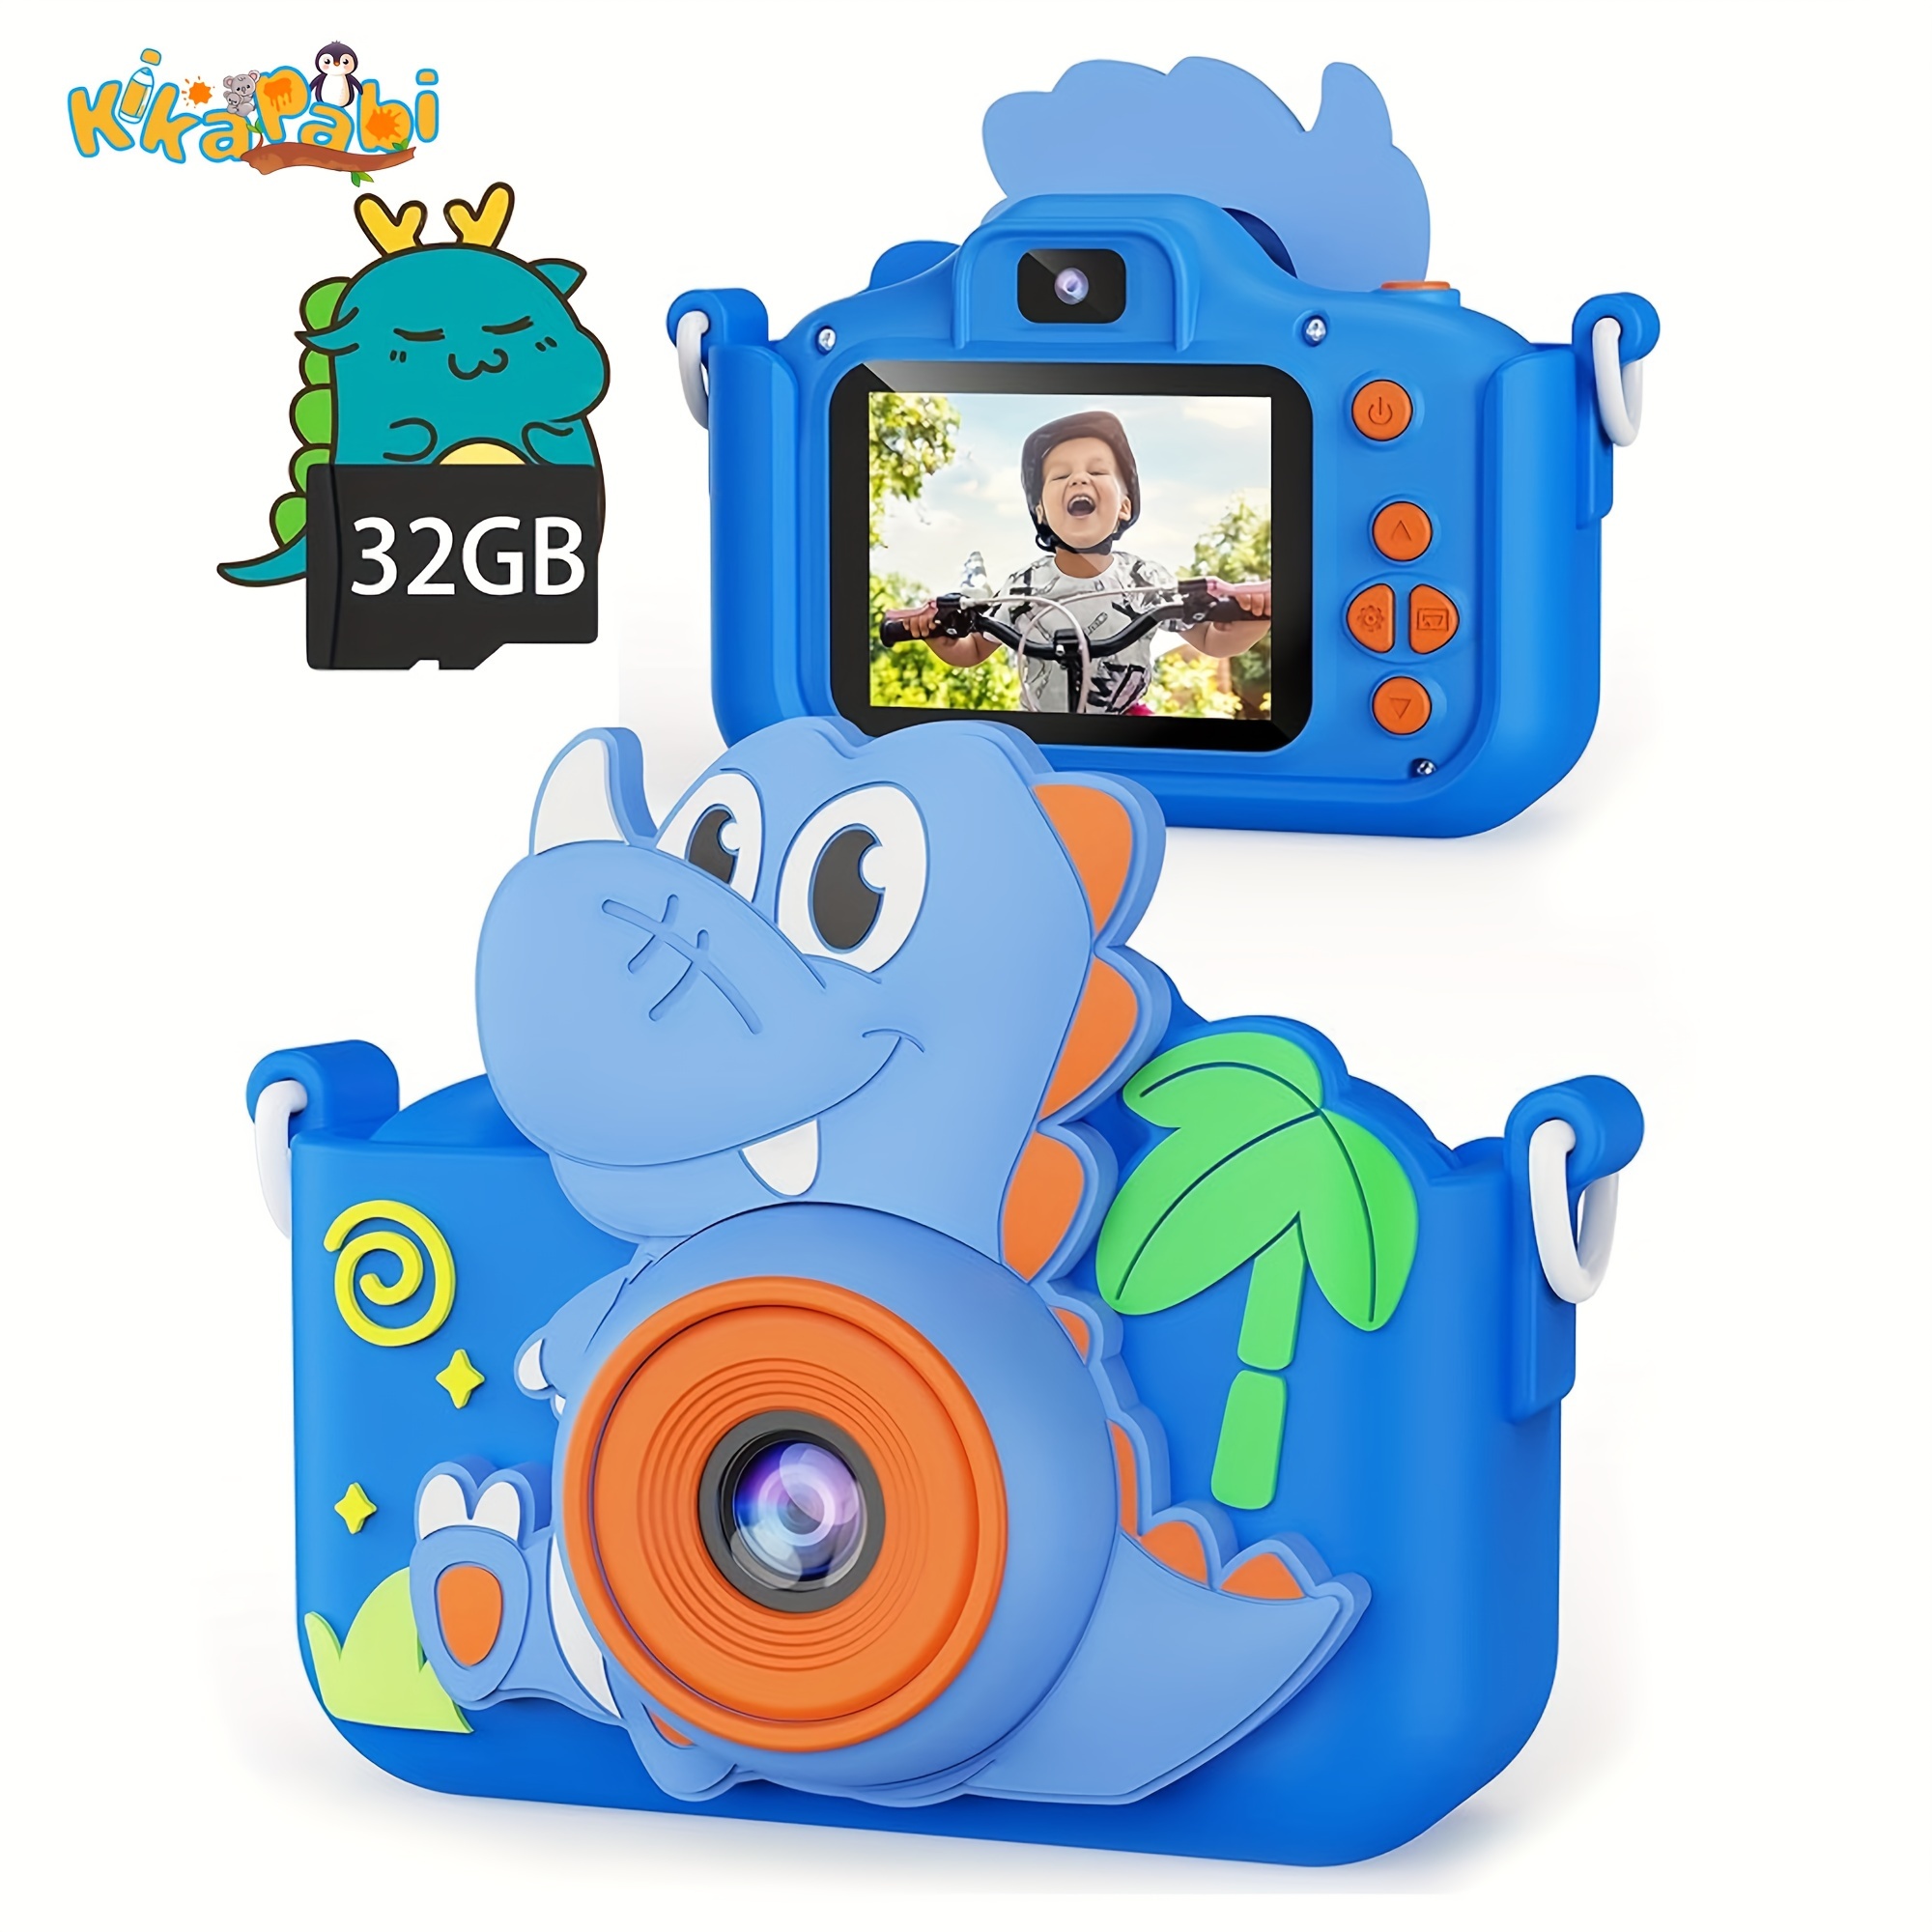 

Kikapabi Kids Camera Toy Digital Camera For Kids, Dinosaurs Birthday Gifts For Boys Age 3-12, 1080p Hd Video Camera For Toddler, Children Toys With 32gb Sd Card Christmas Gift